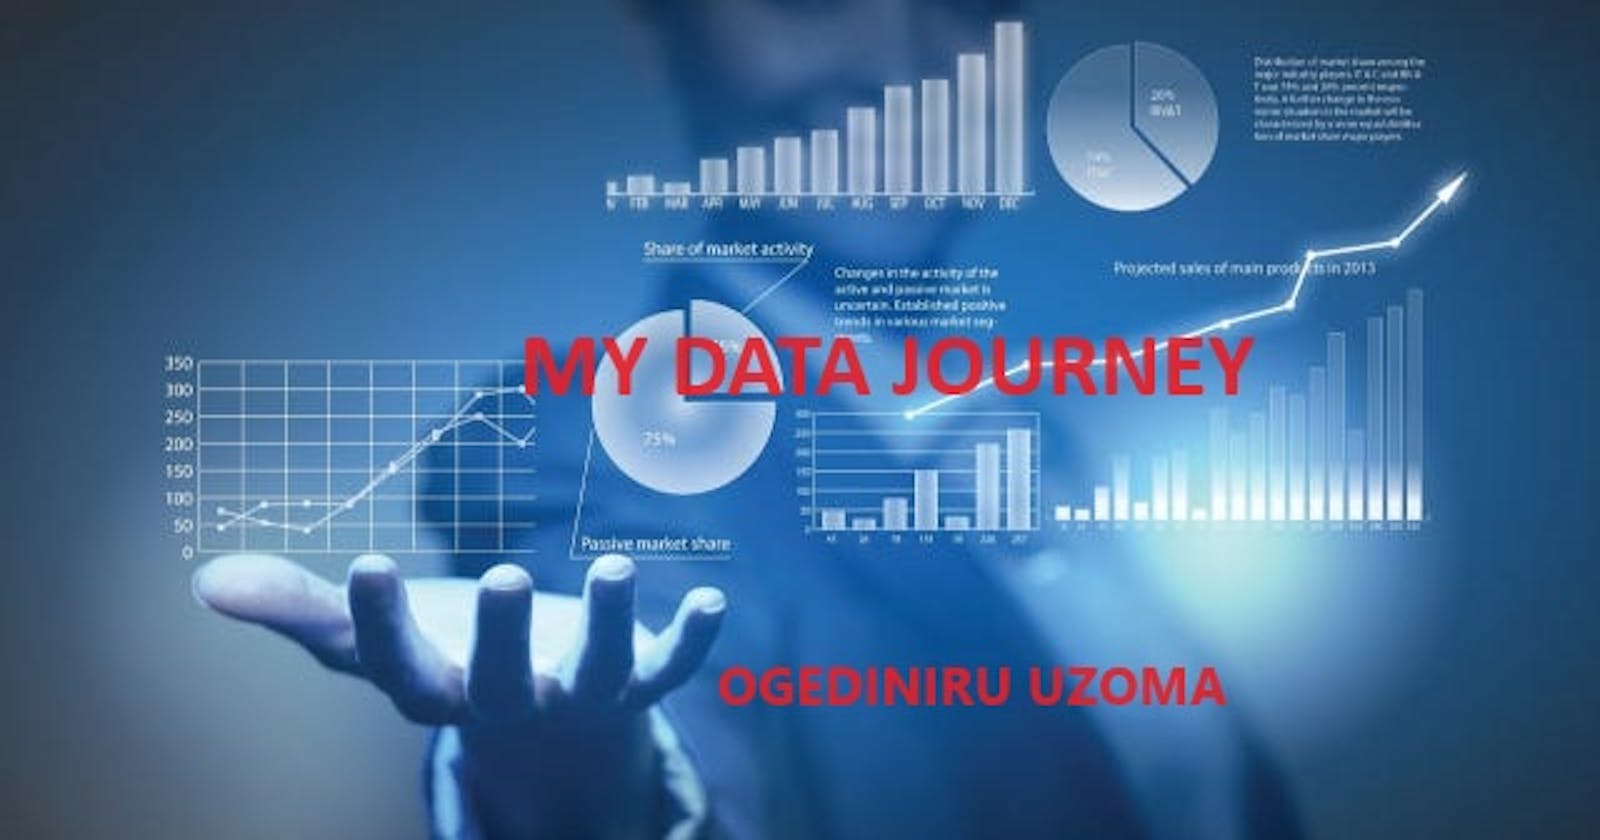 Journey with me into the World of Data